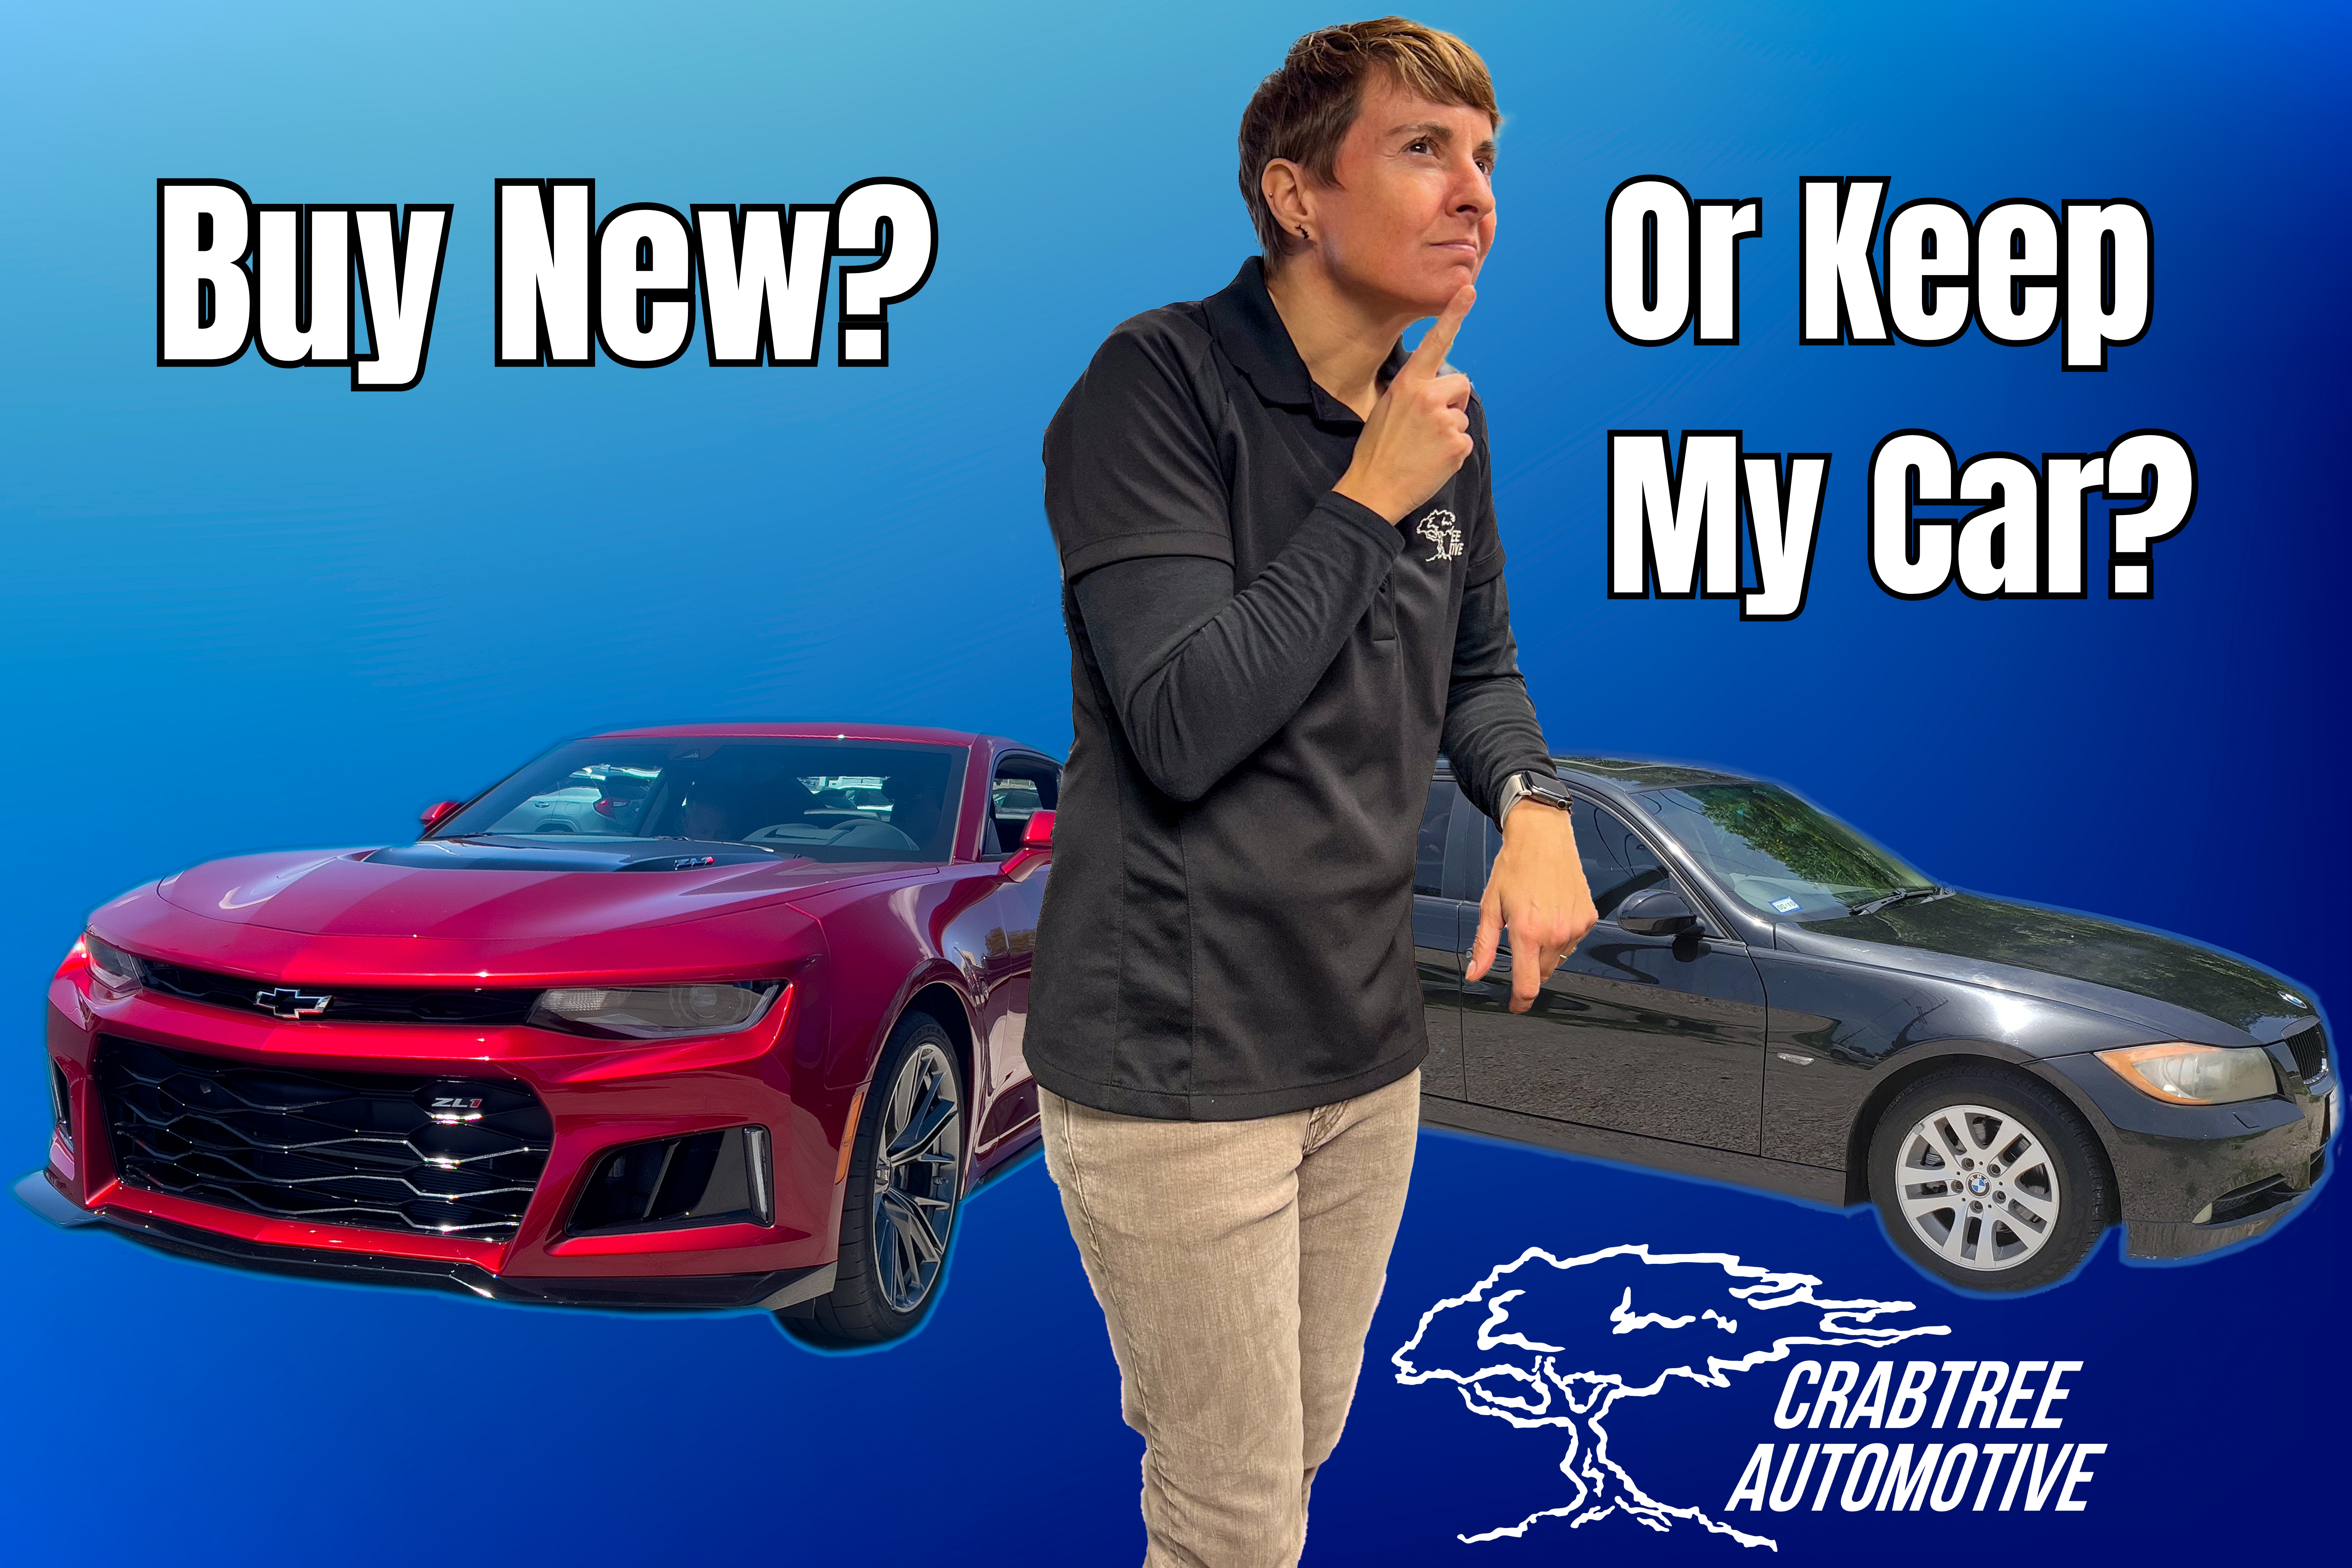 Should I Keep My Car Or Buy A New One?